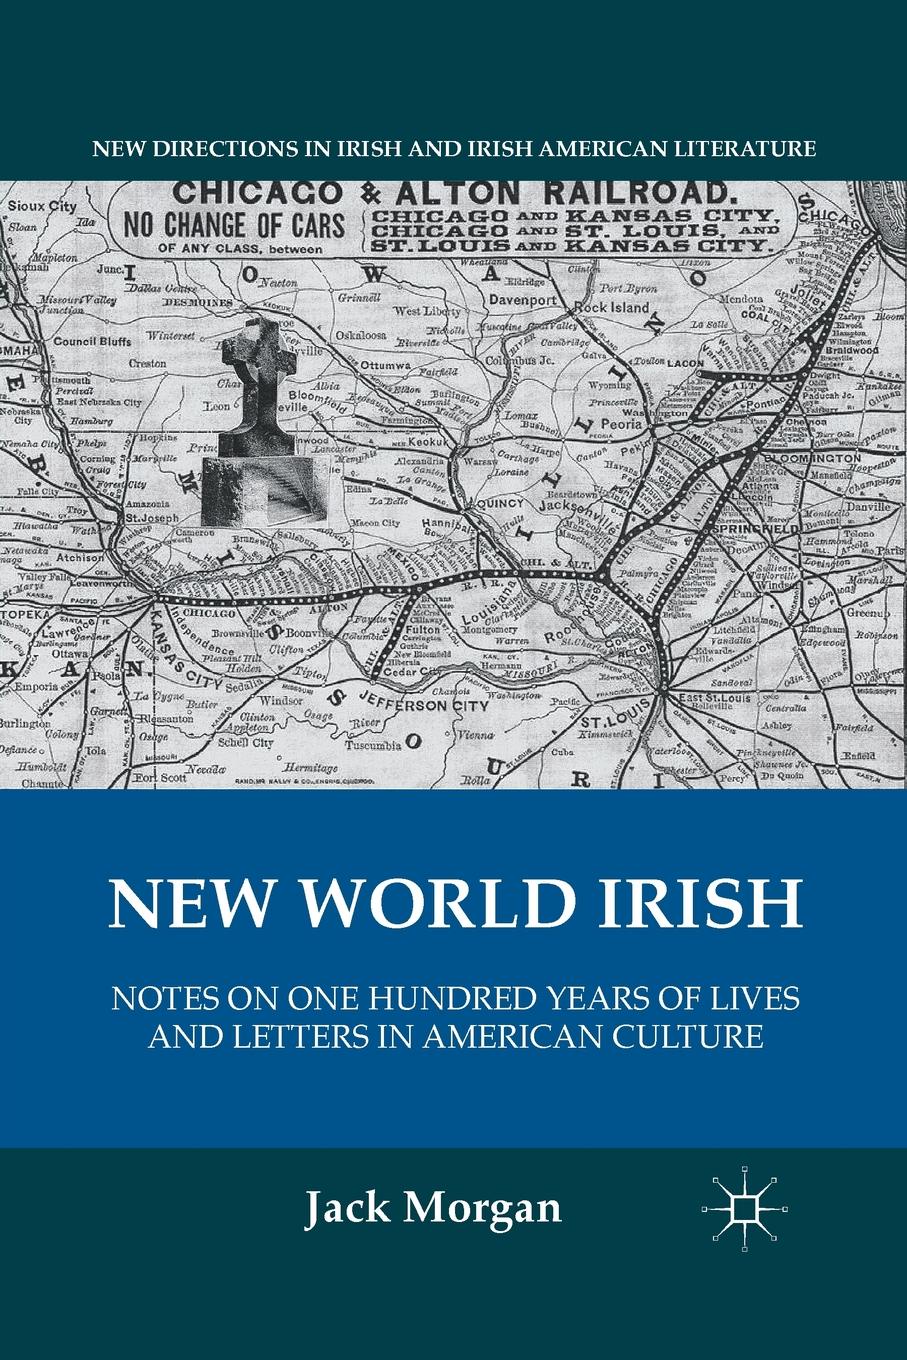 New World Irish. Notes on One Hundred Years of Lives and Letters in American Culture